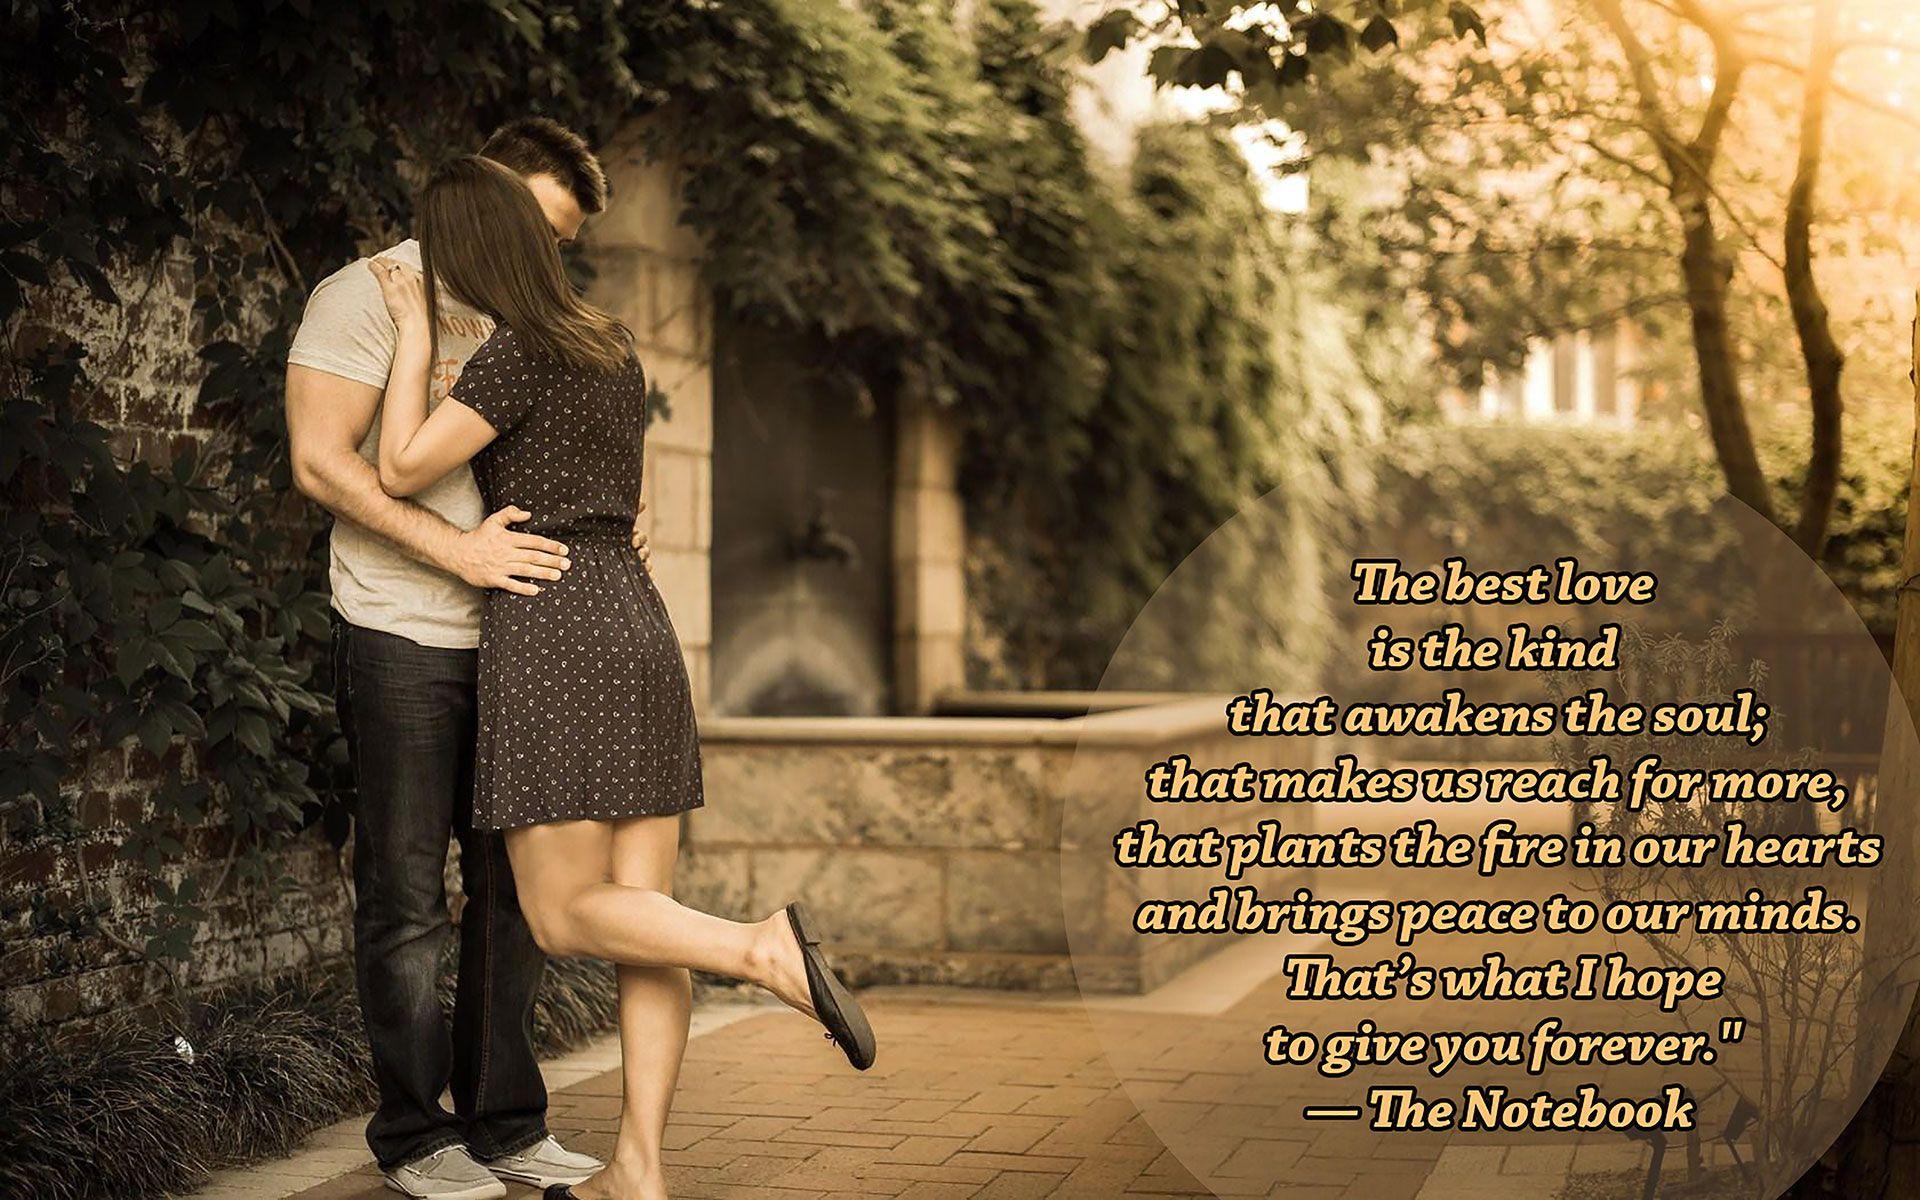 Love Quotes Wallpaper -Romantic Couple Image with Quotes